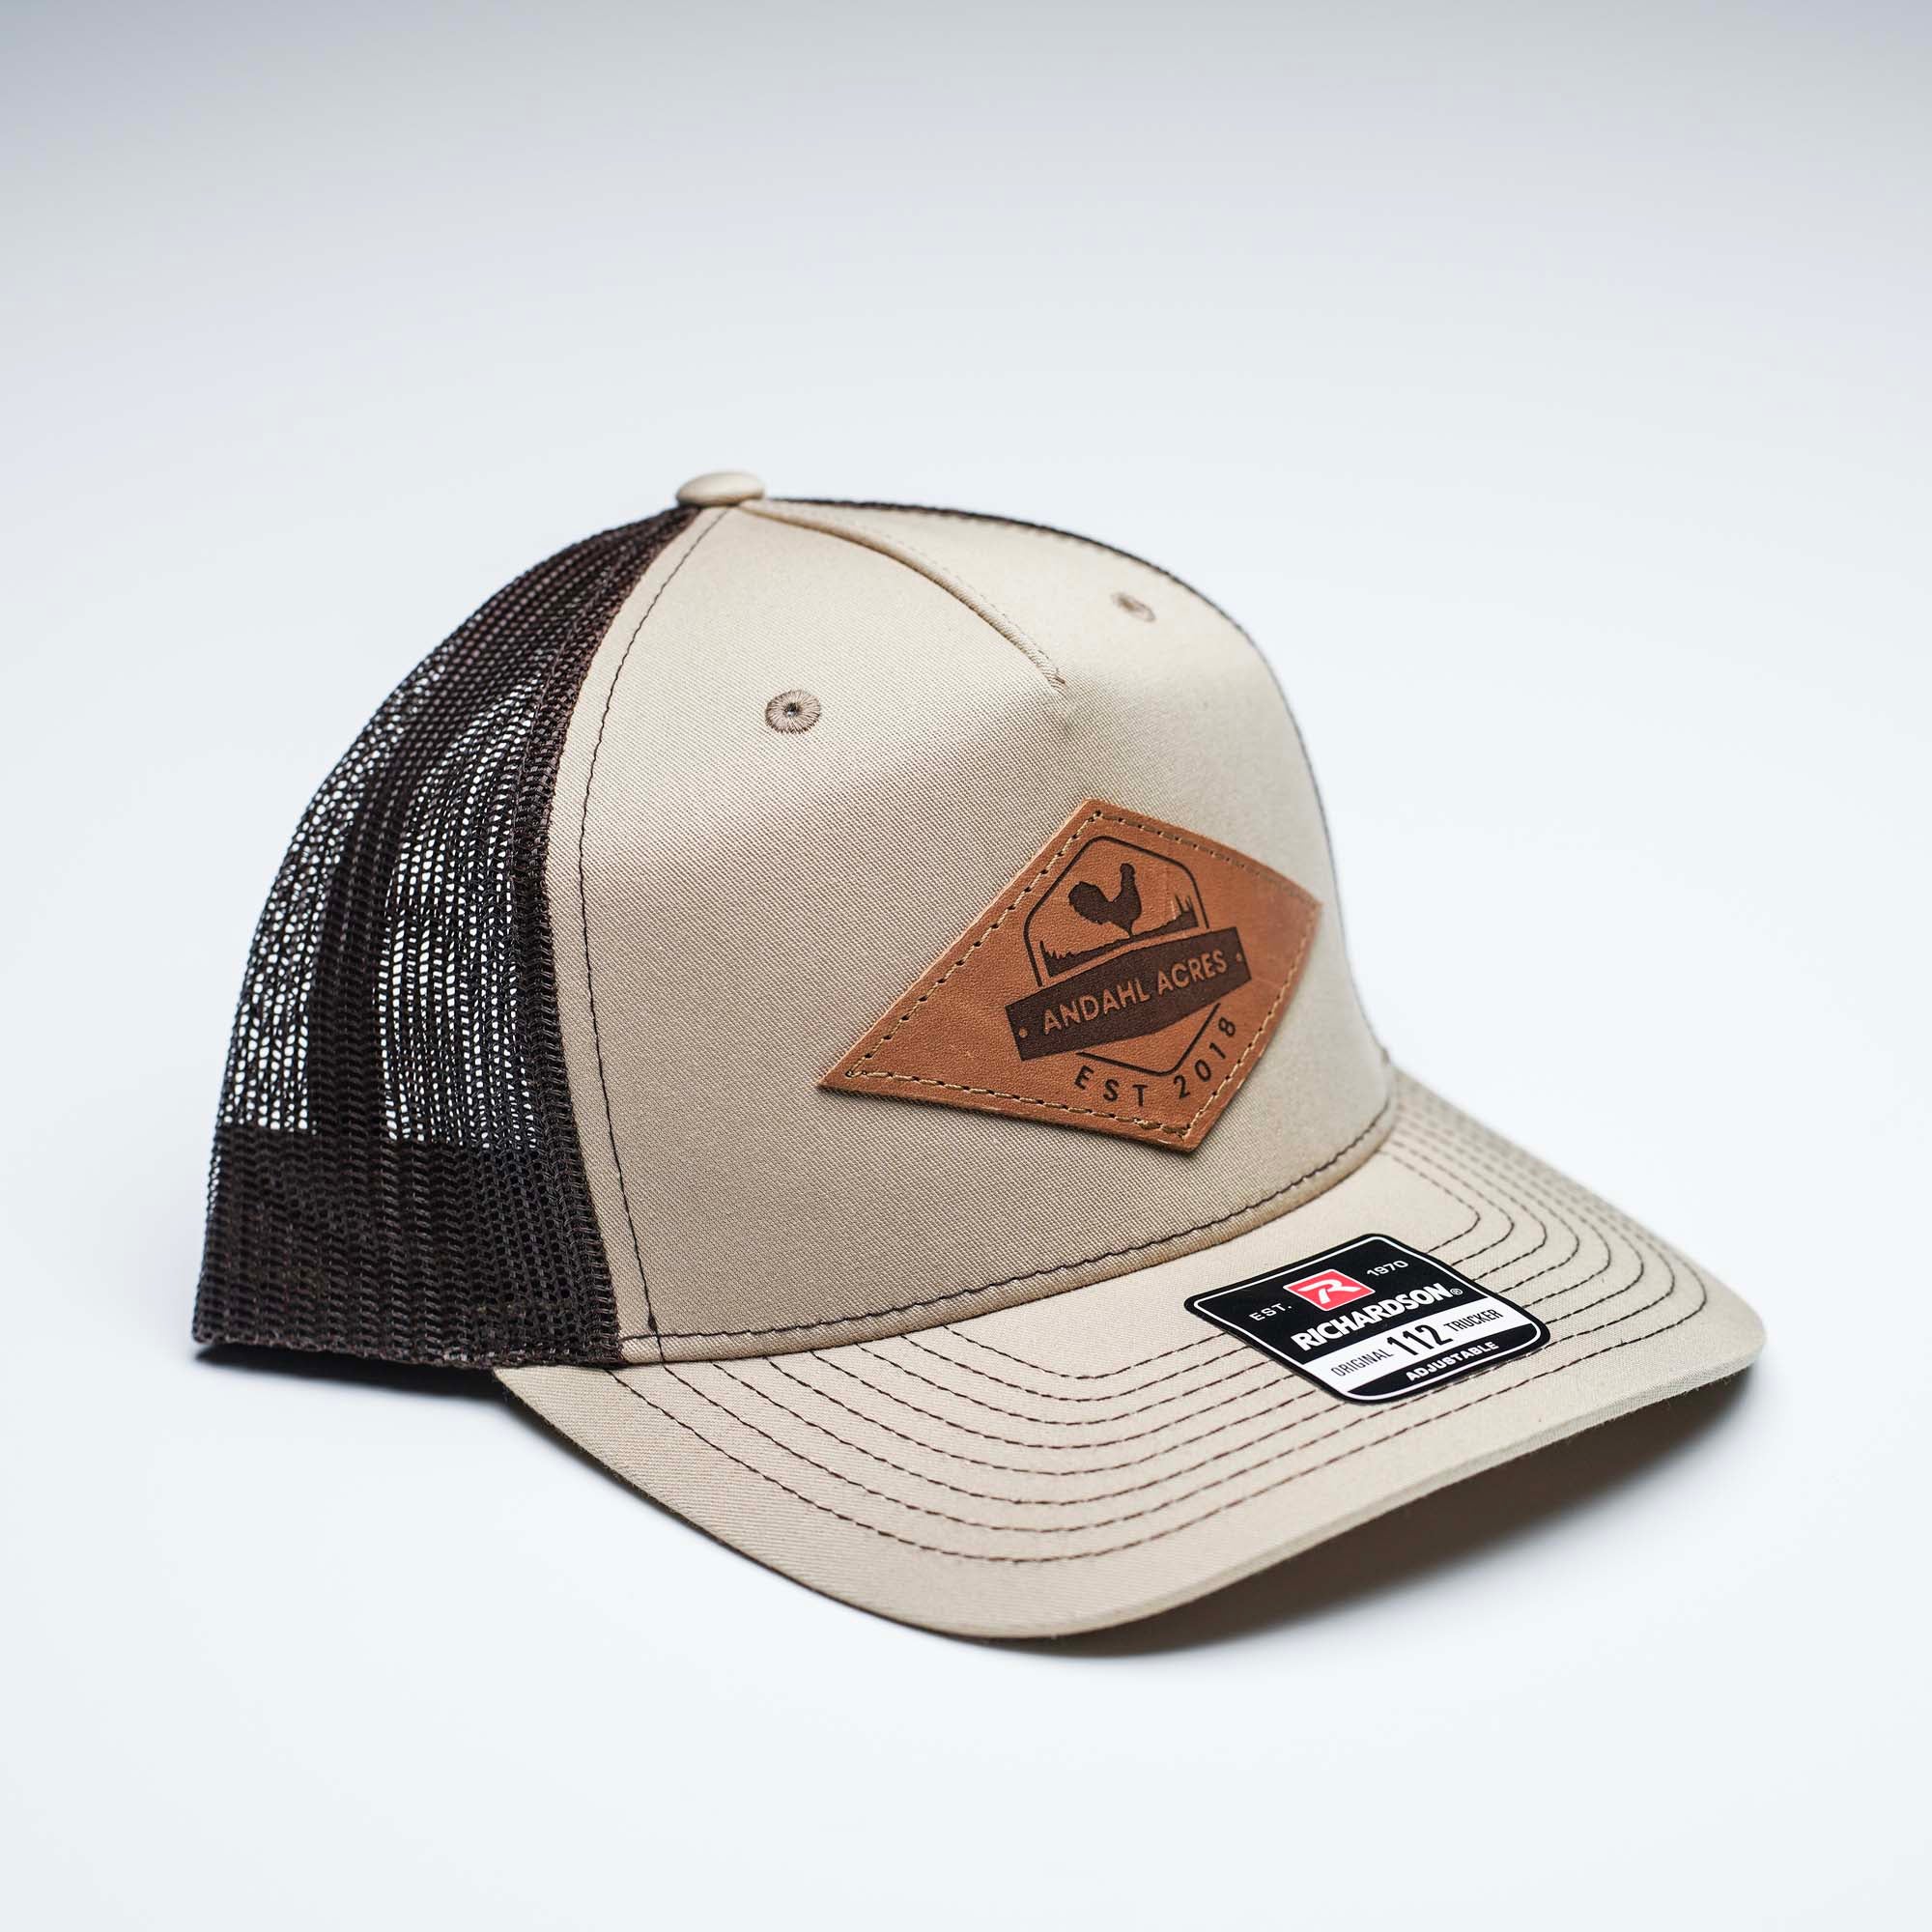 Lasered Leather Patch Trucker Hat ~ Richardson 112FP Five Panel Trucker Cap ~ Customized with YOUR LOGO